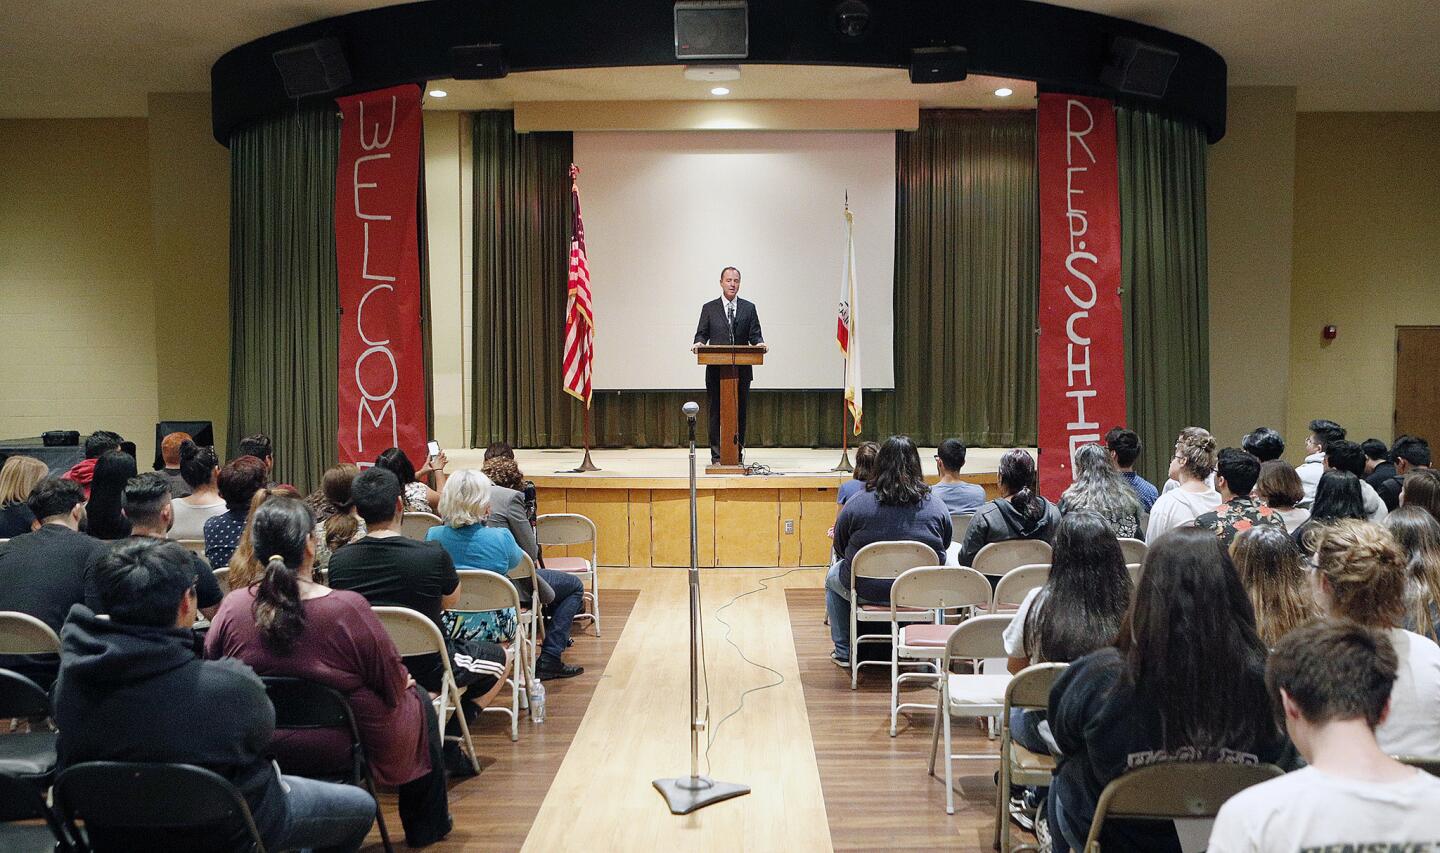 U.S. Congressman Adam Schiff introduces himself before taking questions posed by students from Daily High School at First United Methodist Church of Glendale on Wednesday, August 29, 2018. A group of students, with prepared questions, asked the Congressman about homelessness, problems in the Congress, and what he likes about his job, to name just a few.